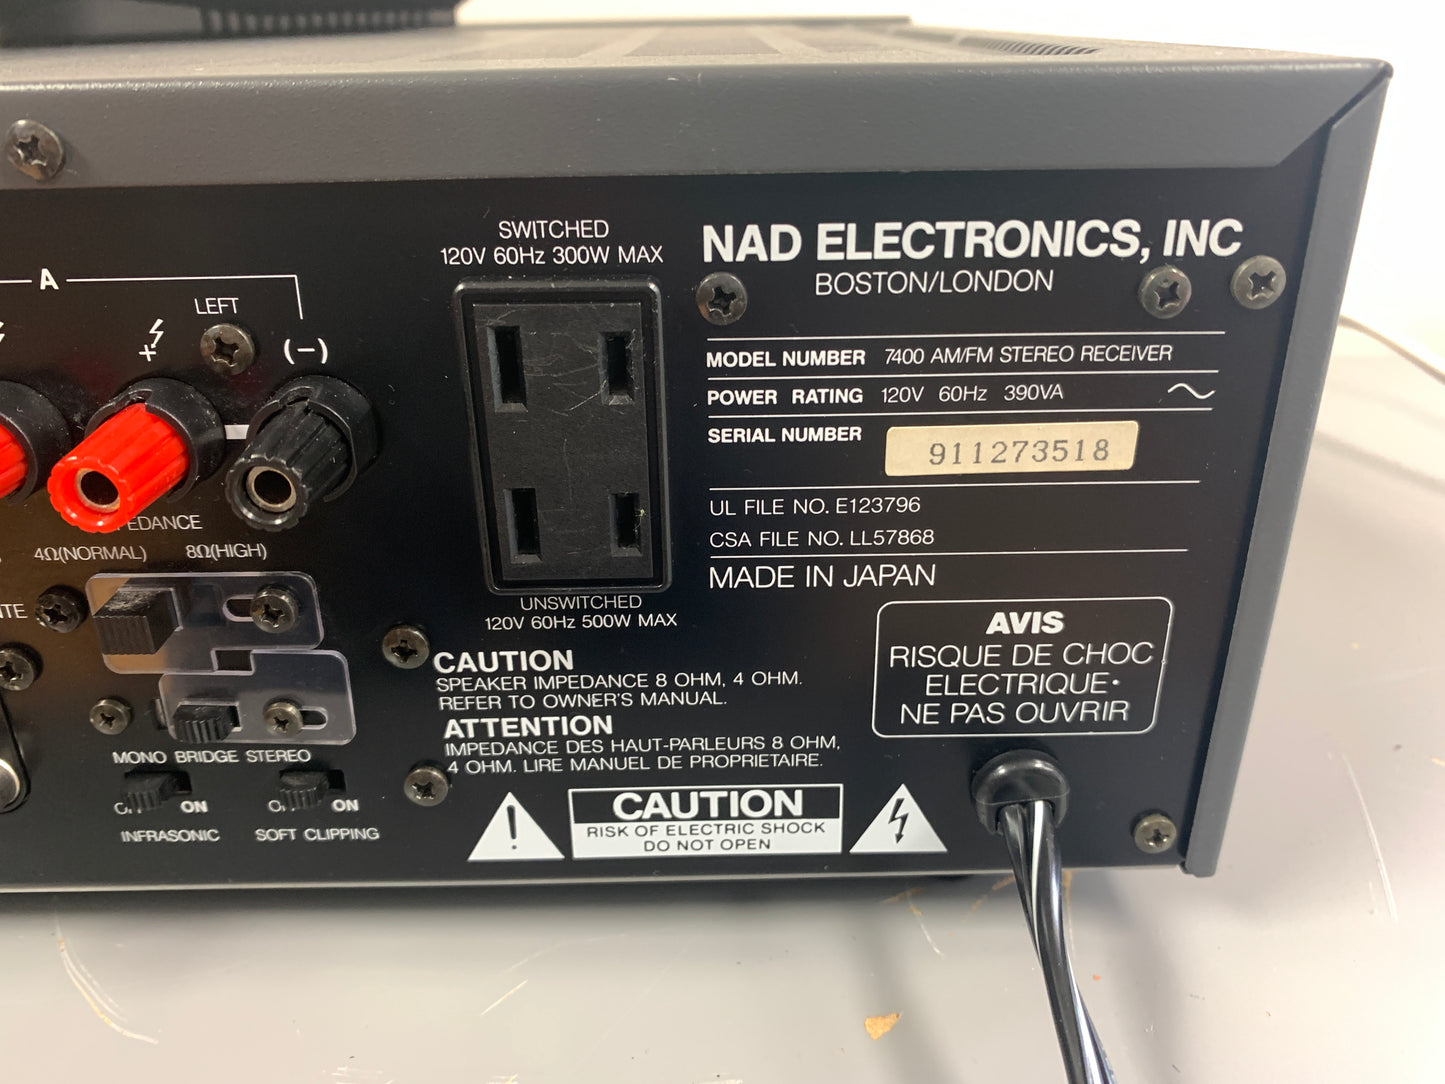 NAD 7400 pe Stereo Receiver * 100W RMS * Remote Control * $100 Flat Ship CONUS Only